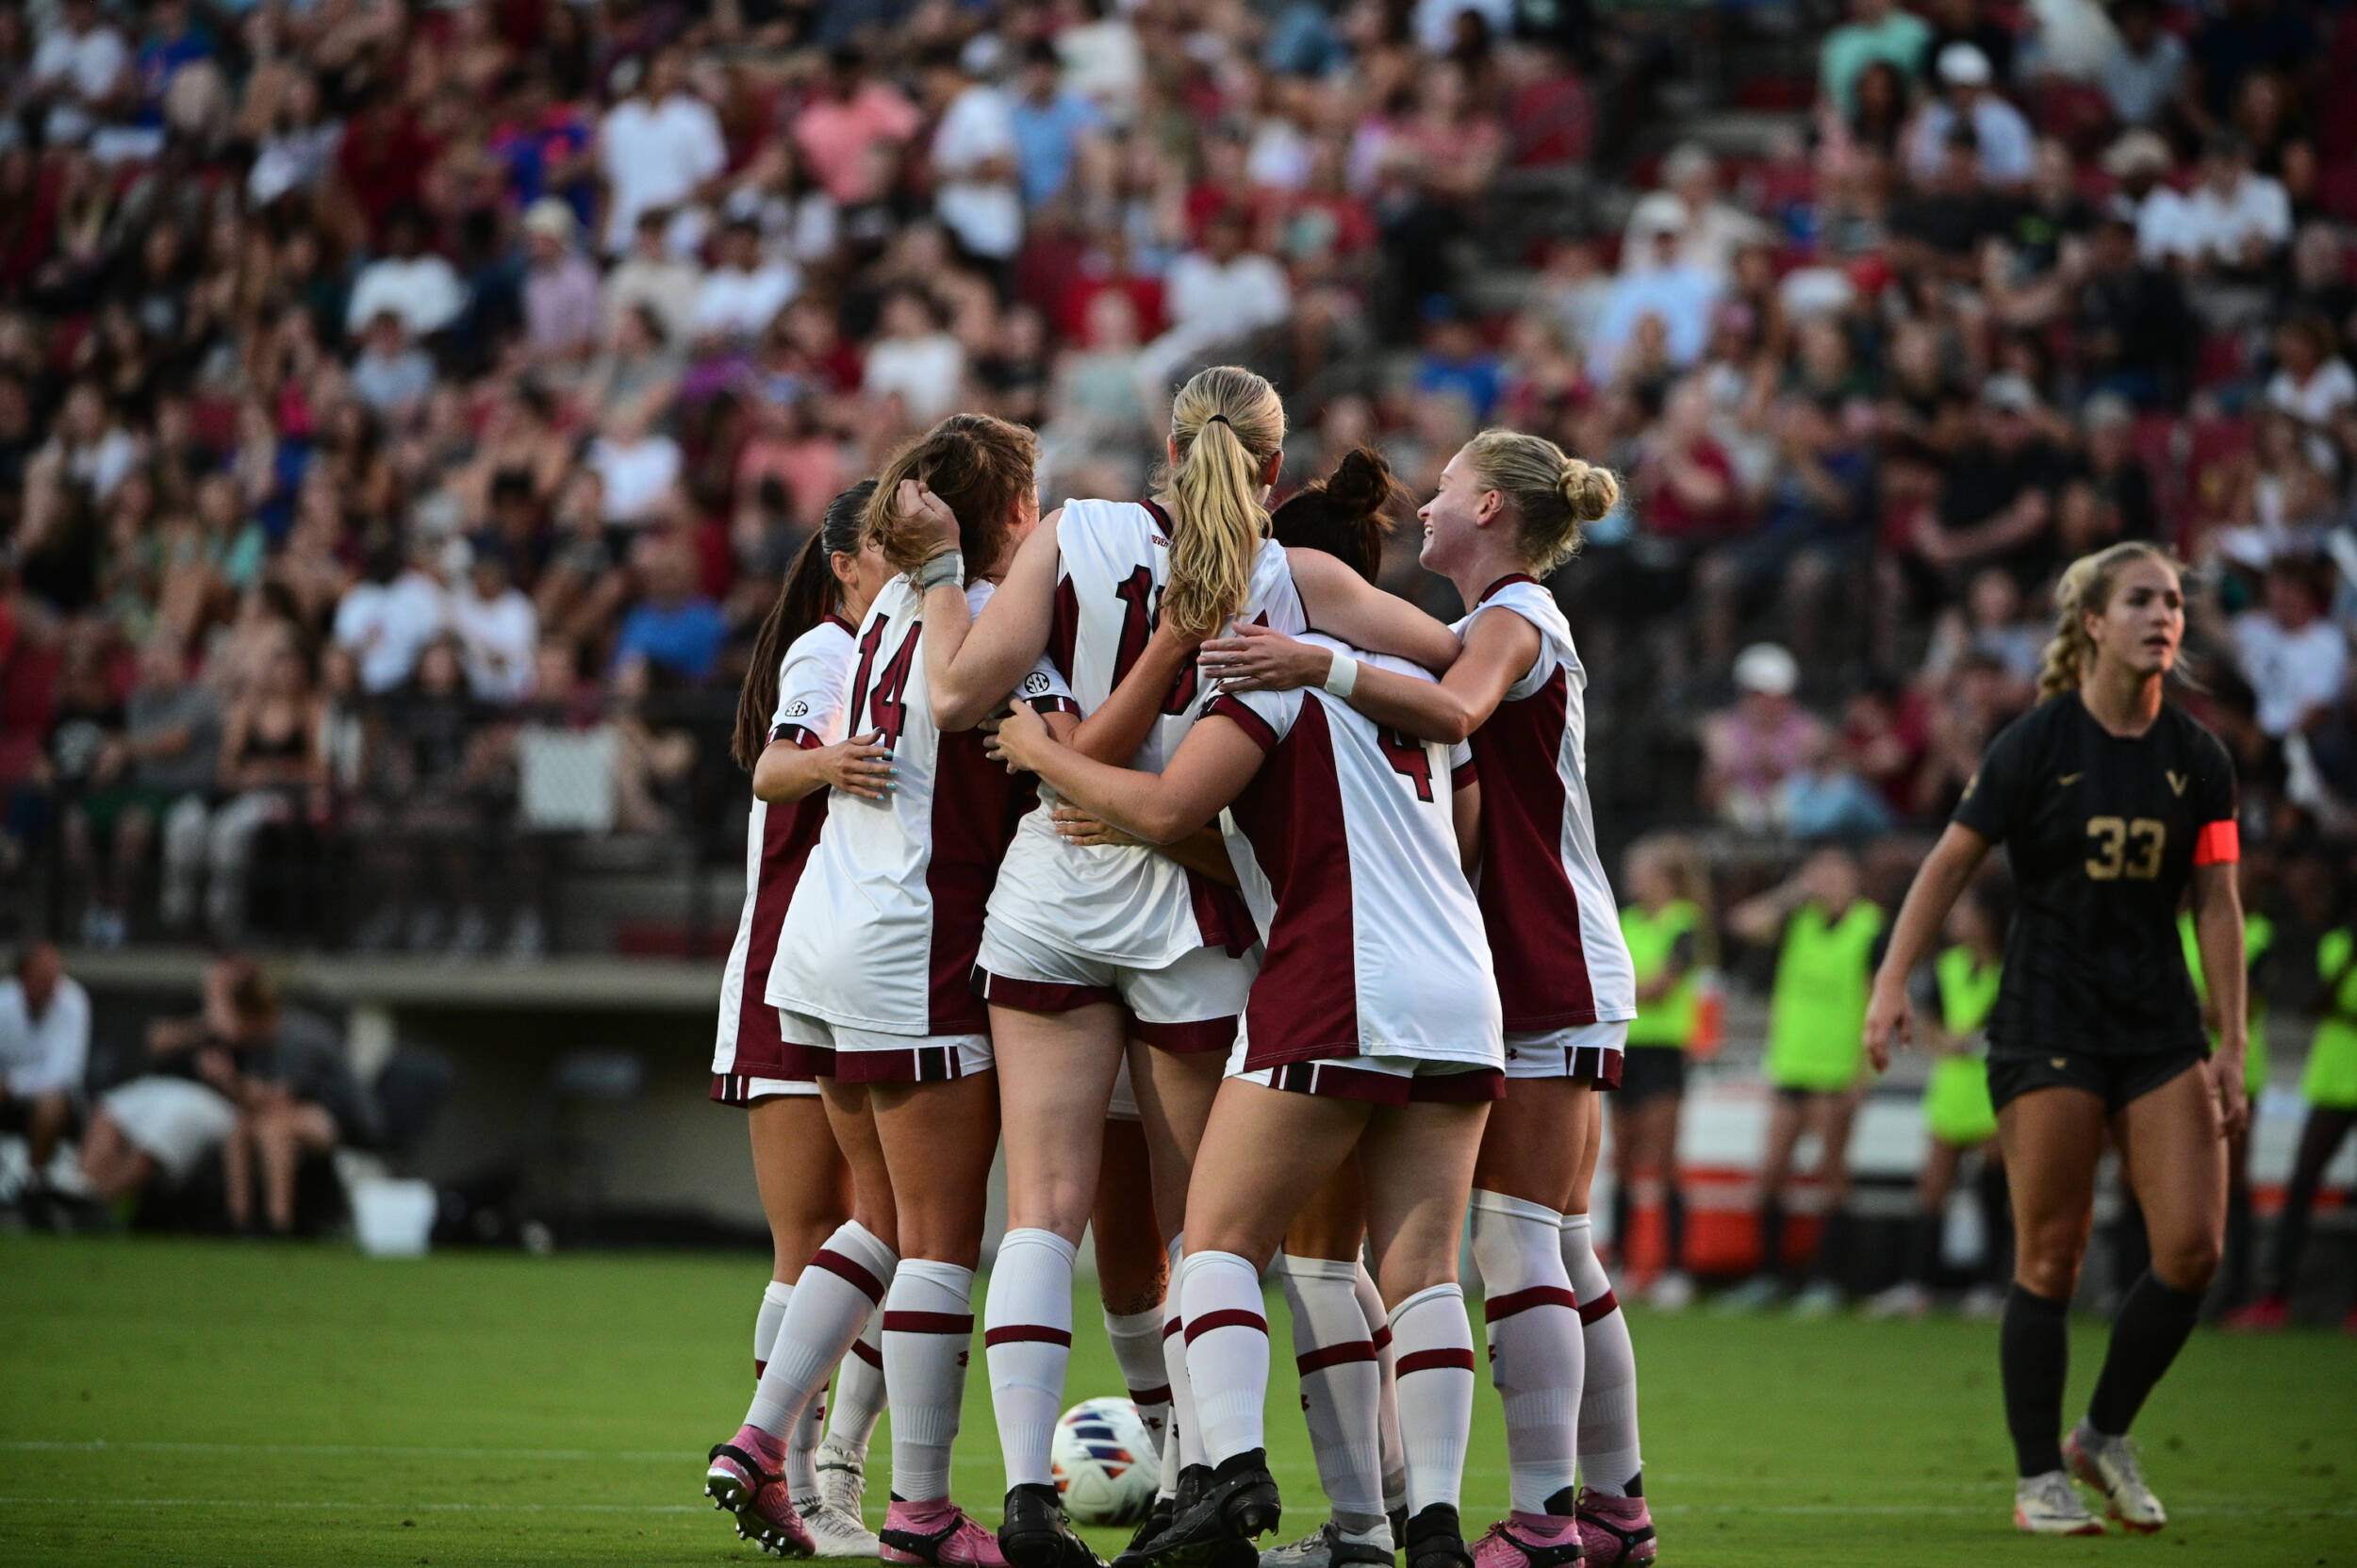 No. 7 Ranked Women's Soccer Heads to First SEC Road Trip